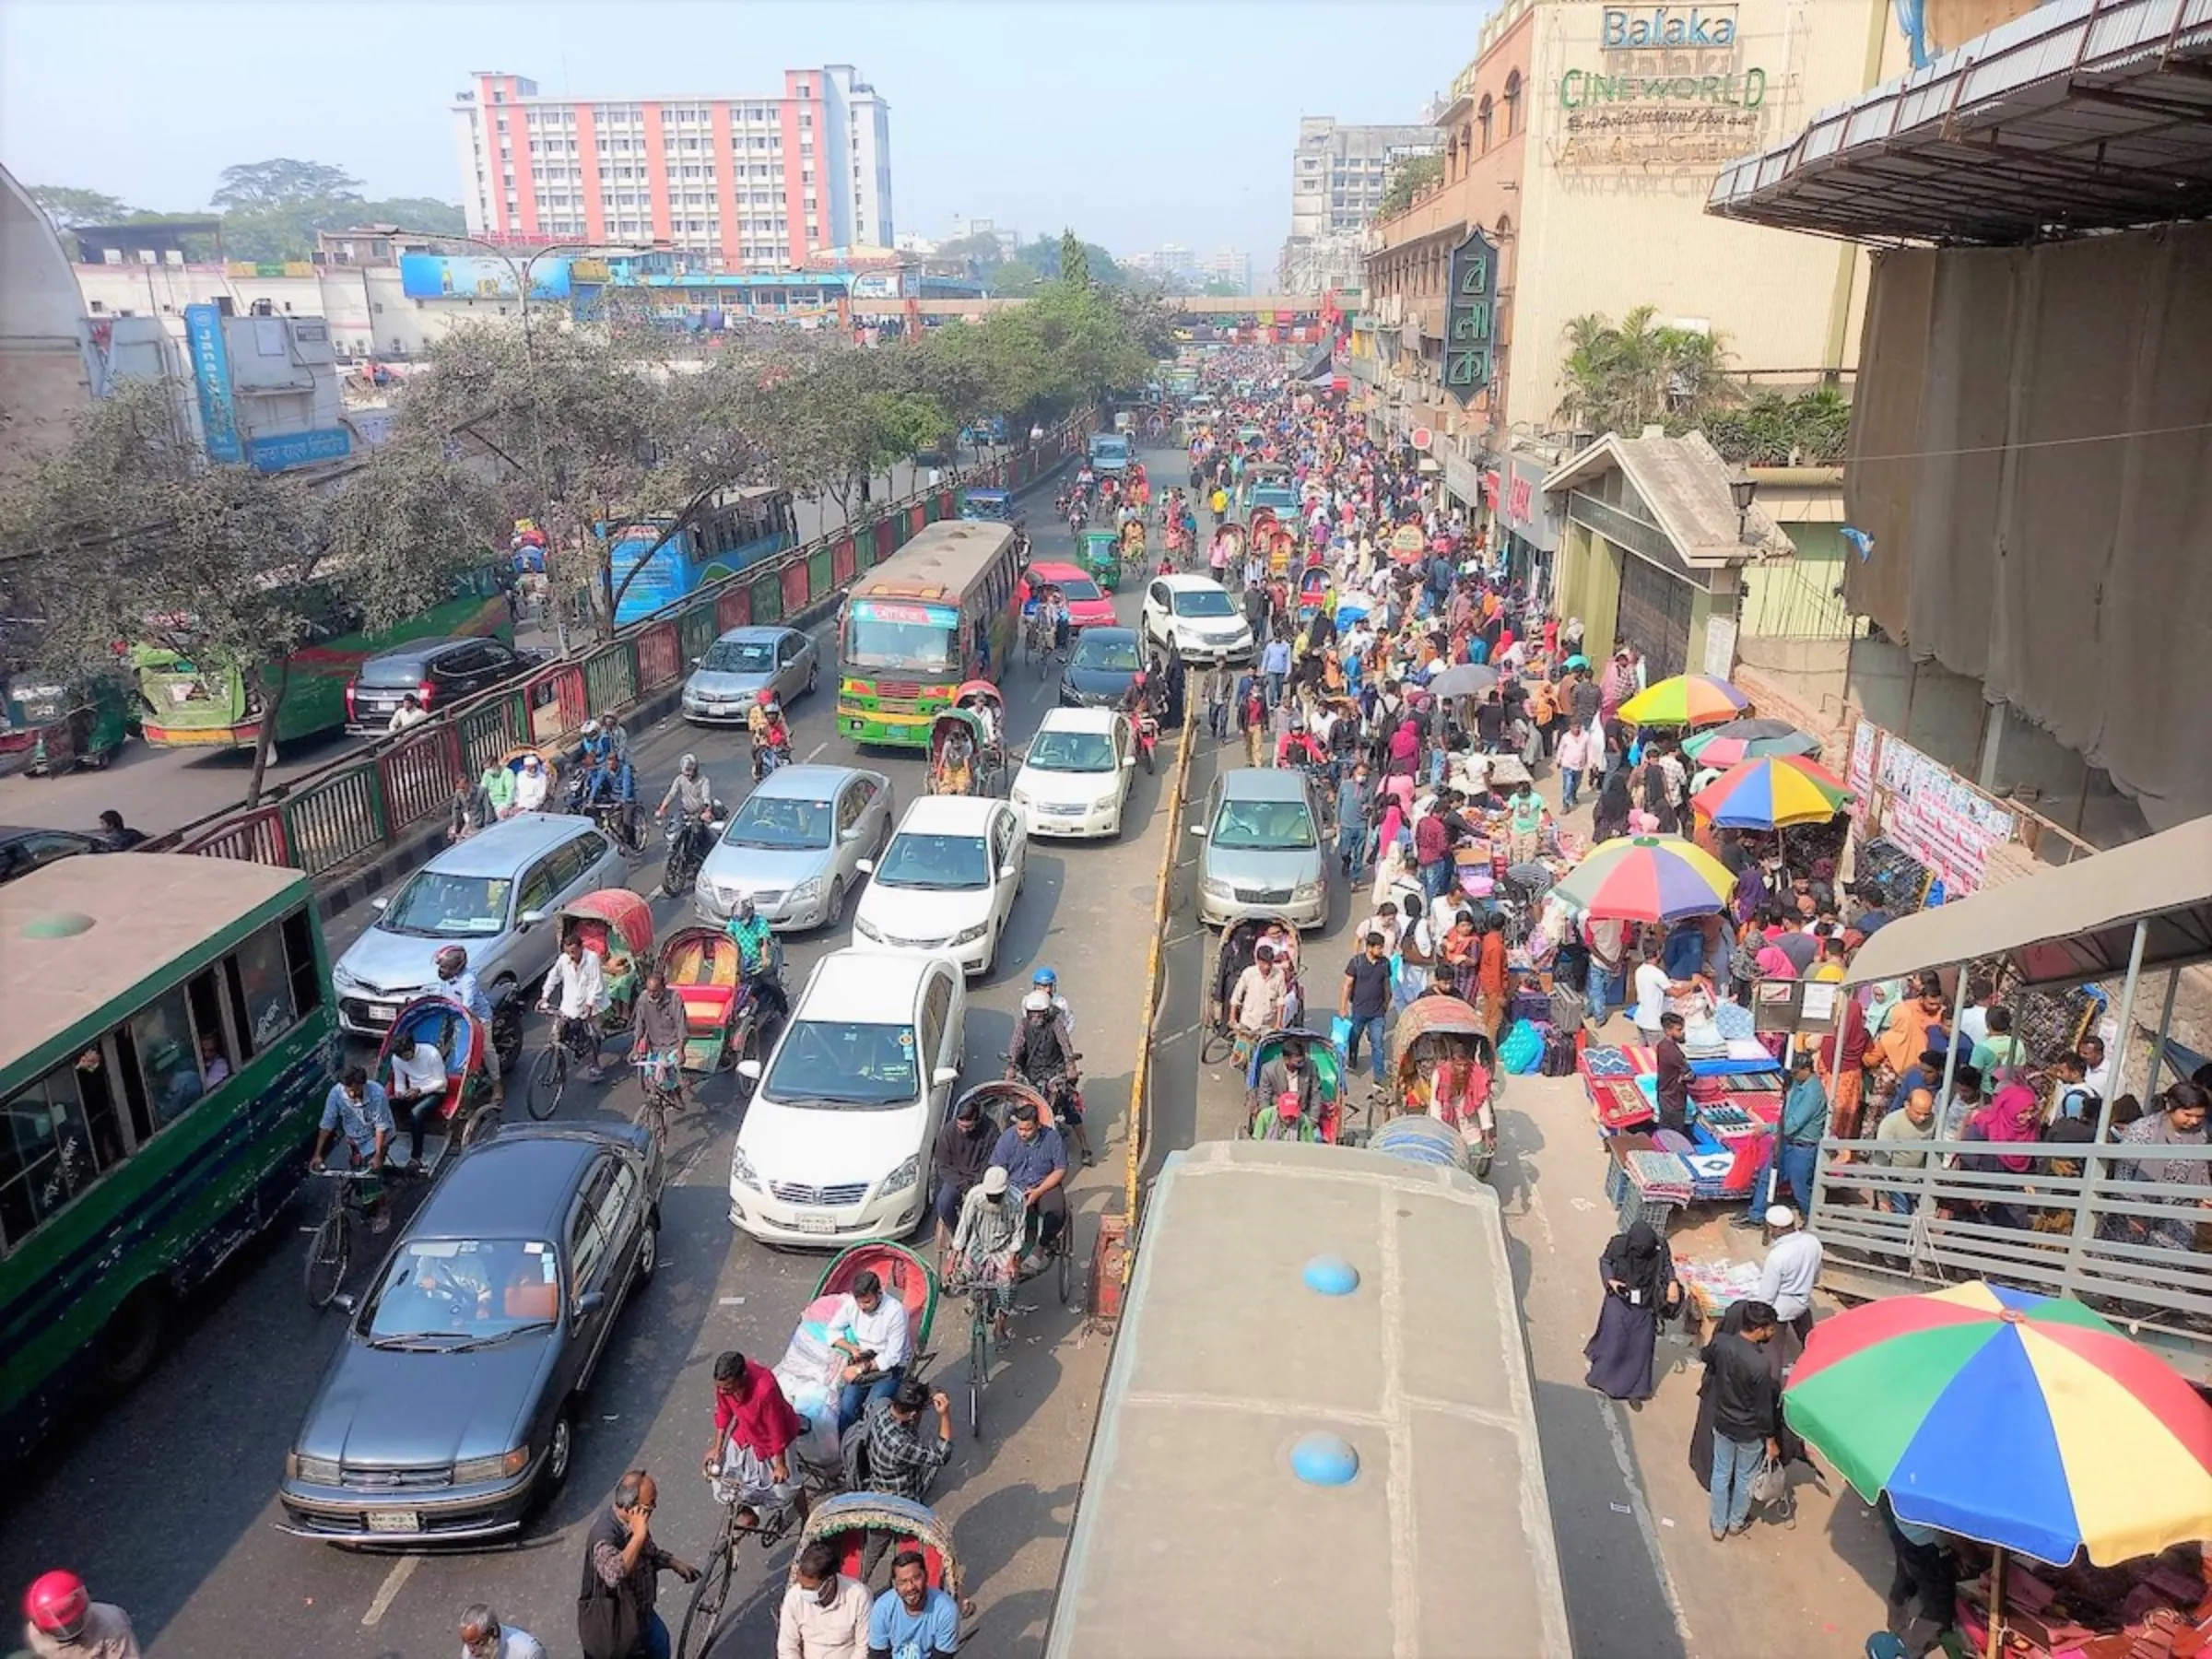 Buses, cars, and rickshaws and people plough through a densely-packed Dhaka street, Dhaka, Bangladesh, February 4, 2023, Thomson Reuters Foundation/Md. Tahmid Zami